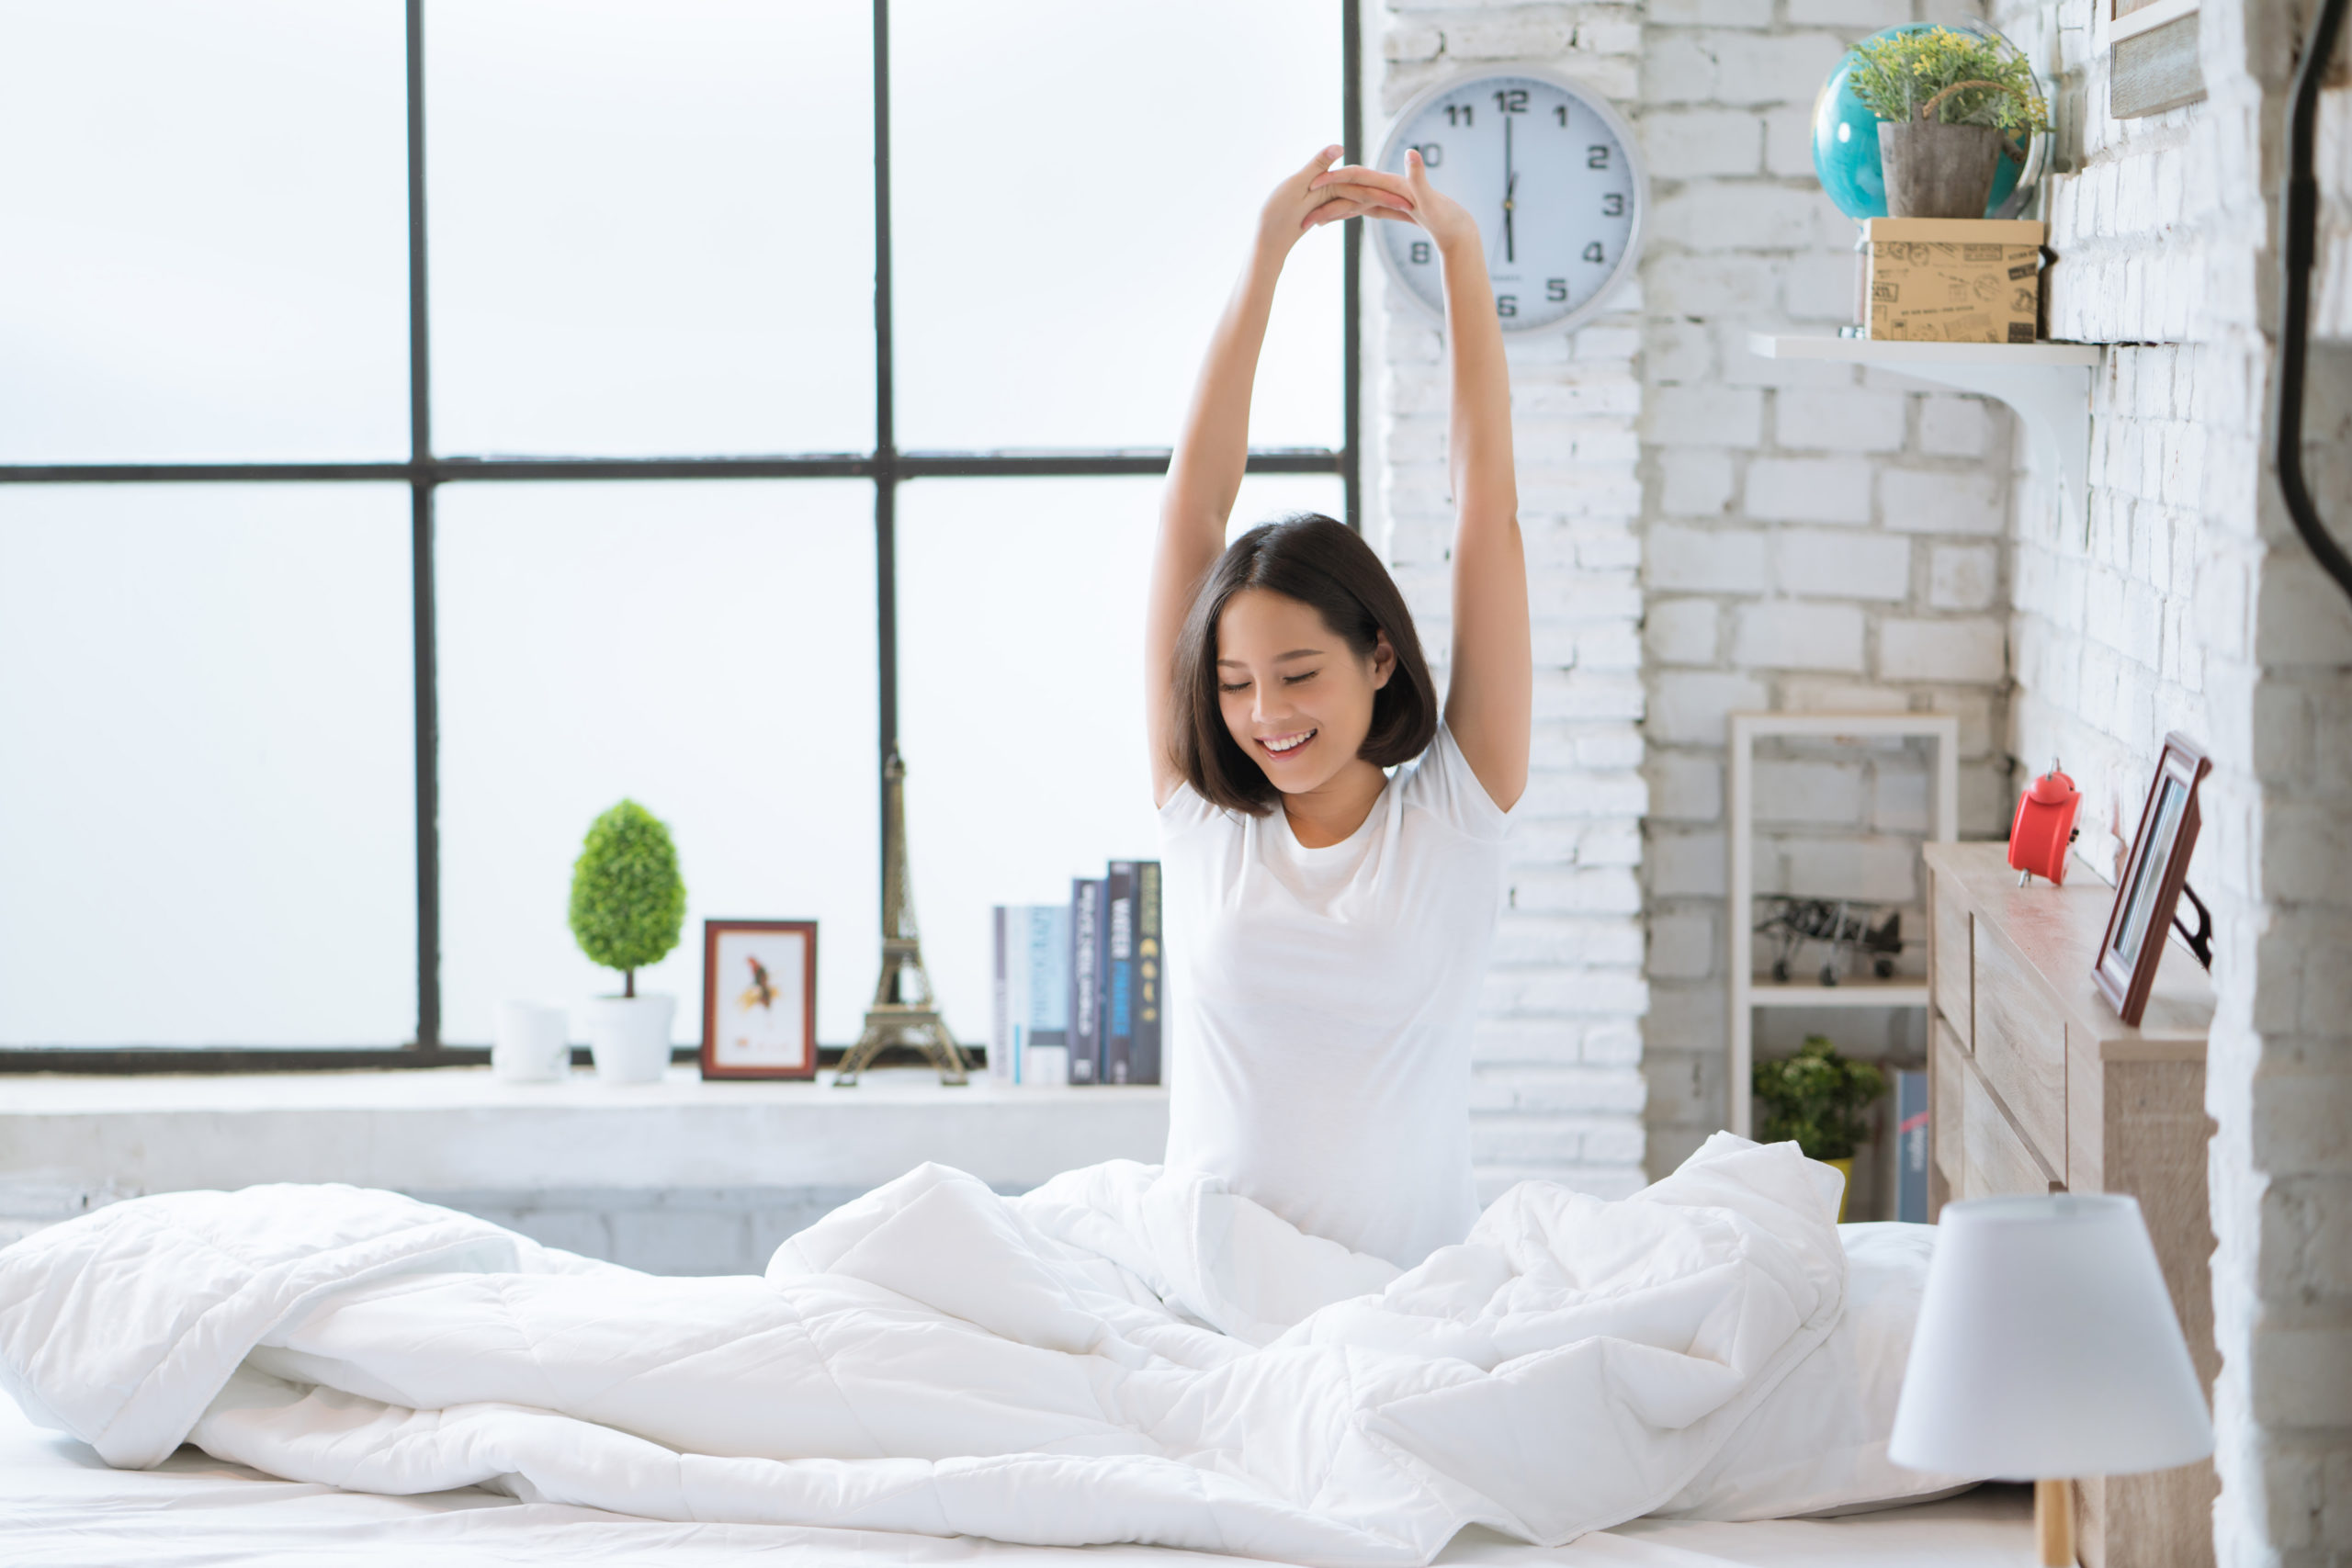 Read more about the article How to Get Better Sleep: 5 Ways to Relax Before Bed